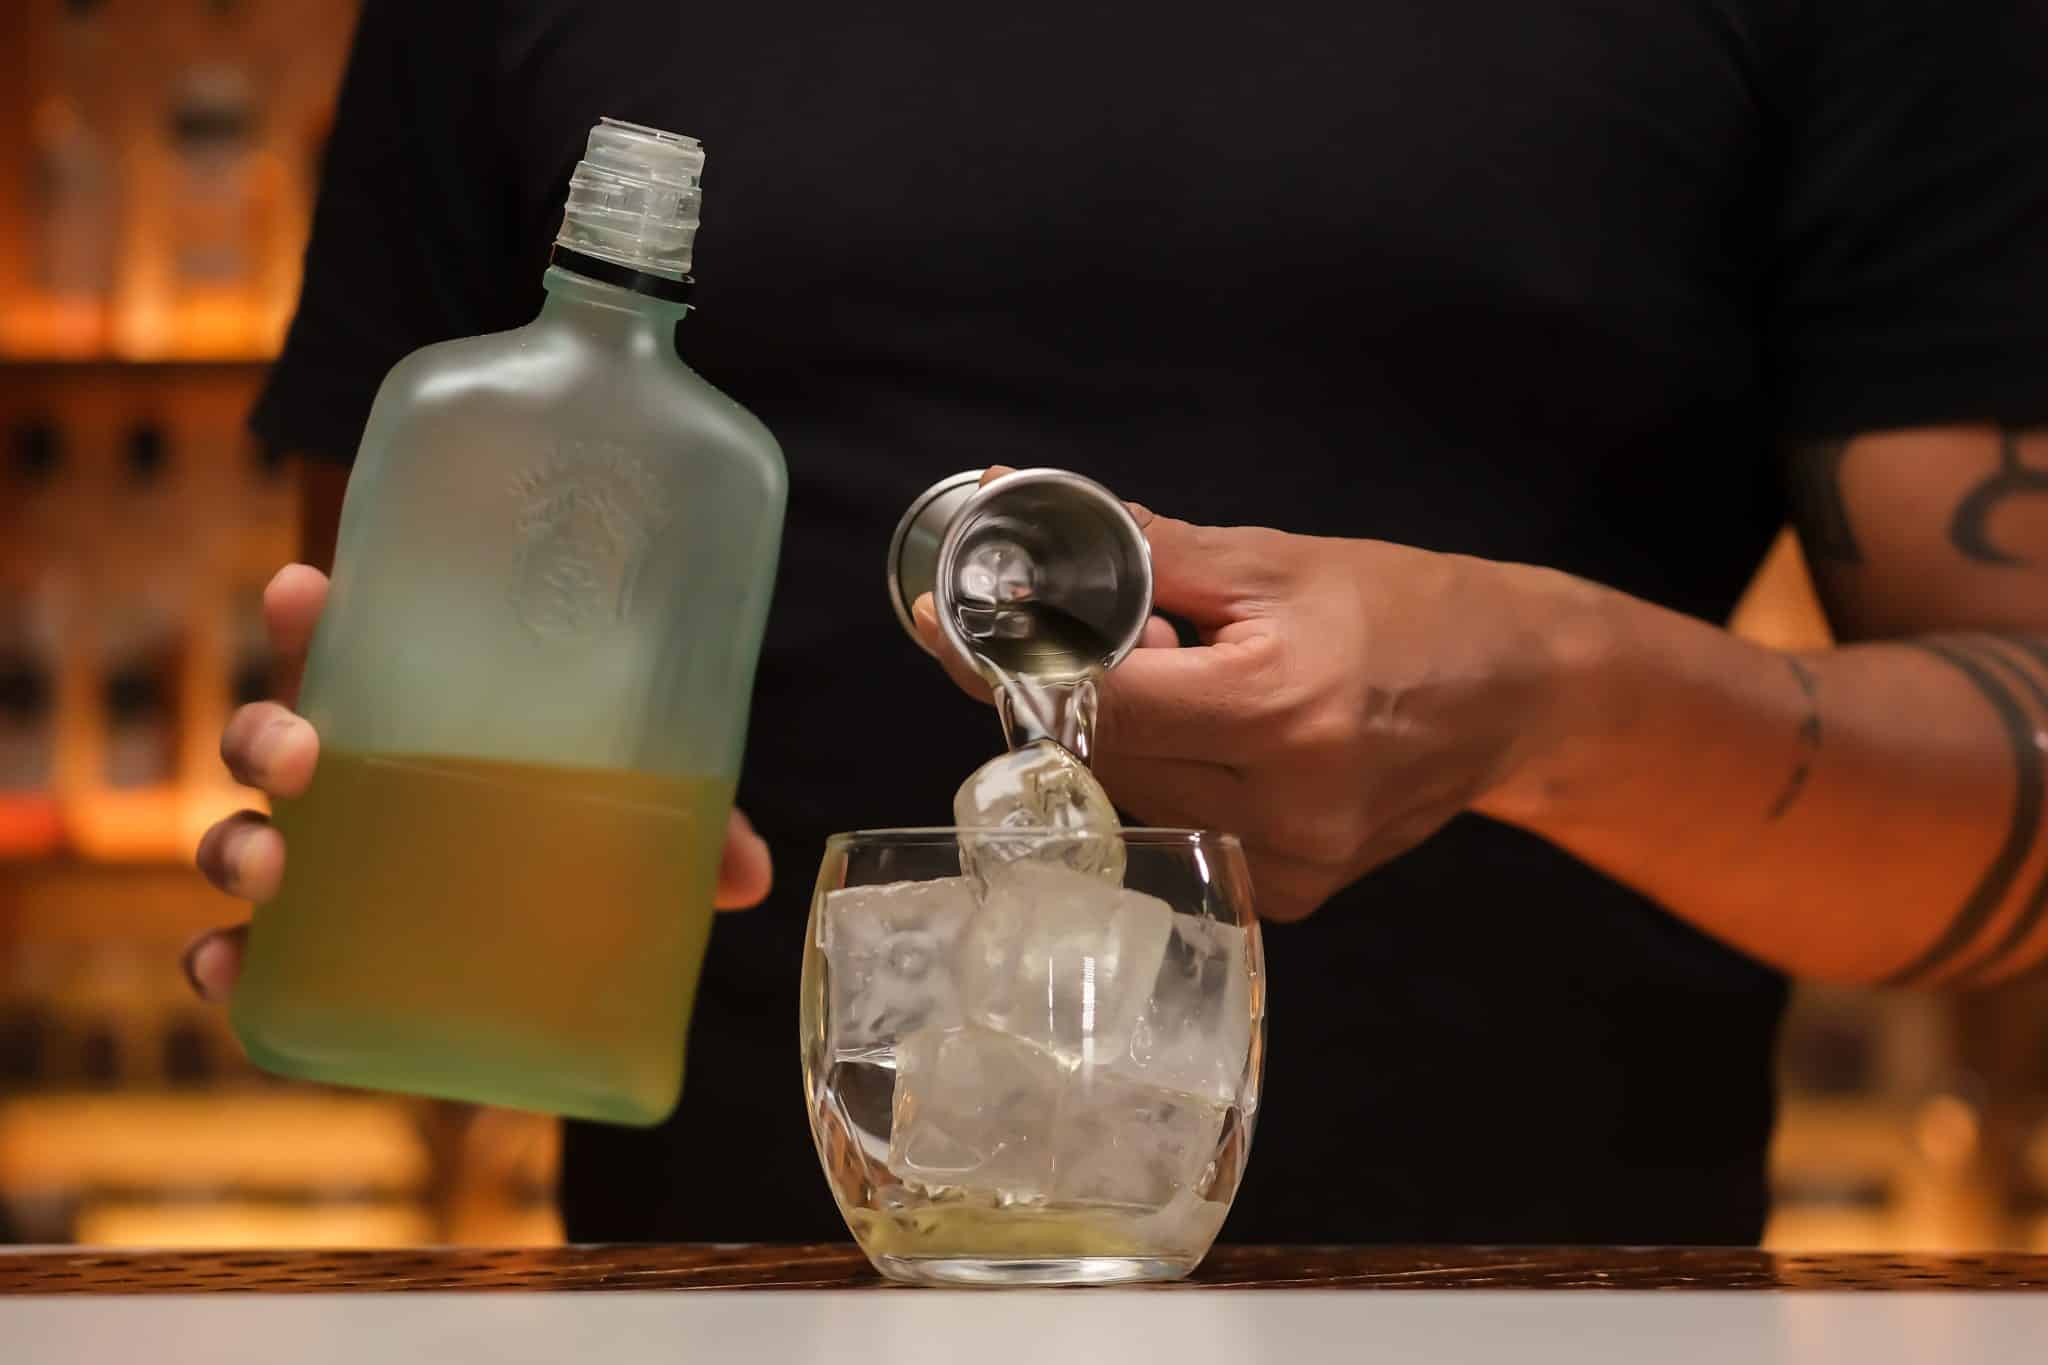 <p>Pour 2 oz of Limoncello over the ice, introducing the cocktail’s primary citrus flavor.</p>
